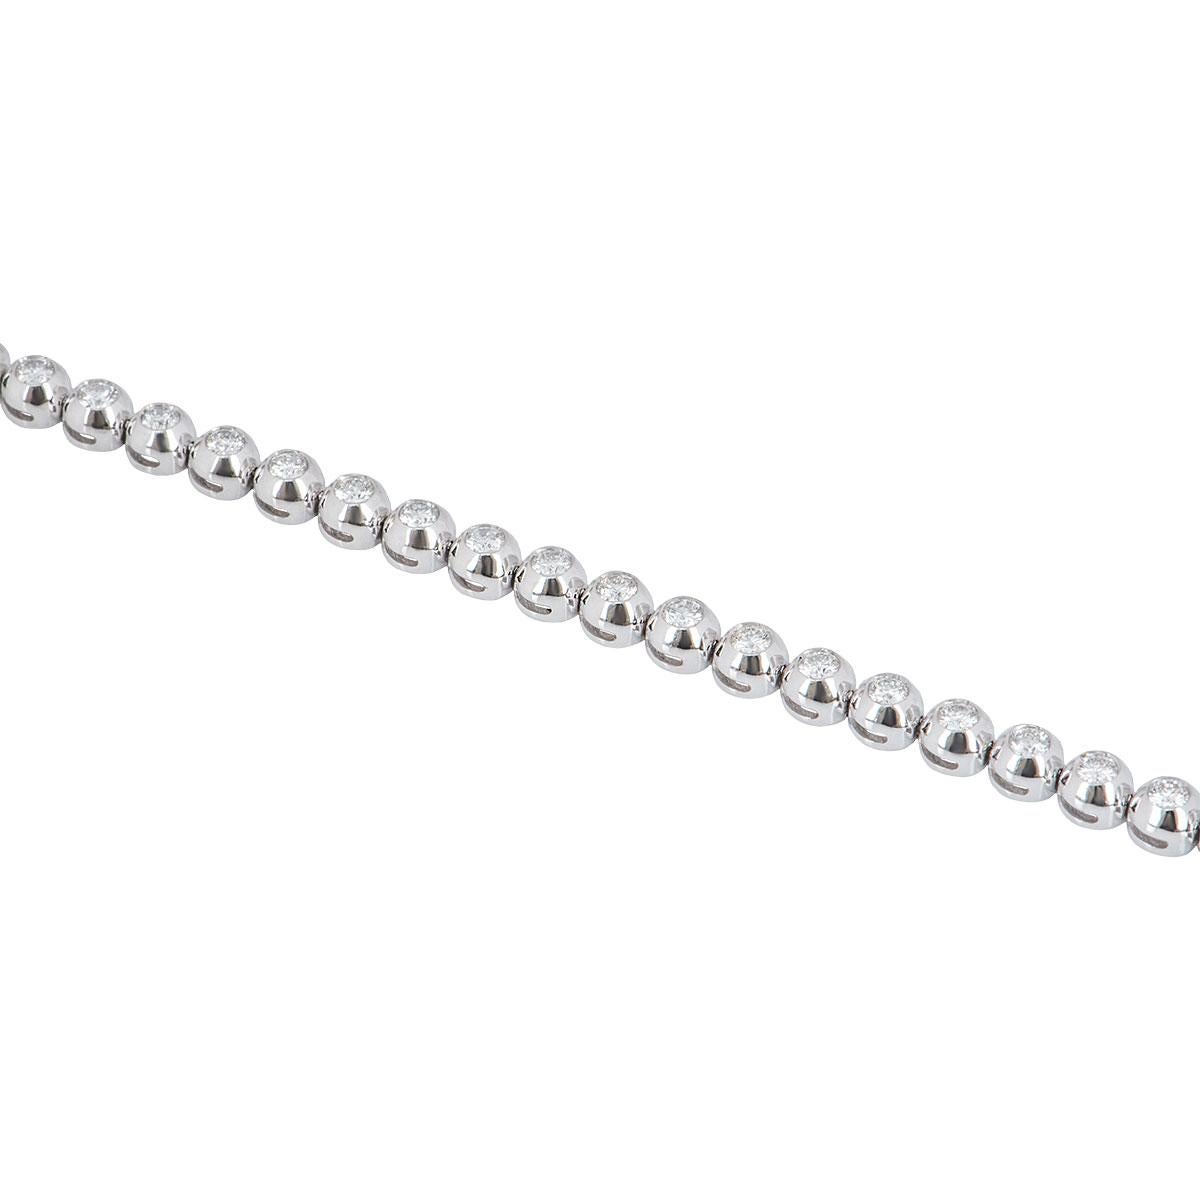 A stunning 18k white gold diamond line bracelet. The bracelet comprises of 34 round brilliant cut diamonds in a bezel setting with a total weight of 2.74ct, G-H colour and VS+ clarity. The bracelet features a box clasp with a figure of 8 clasp on